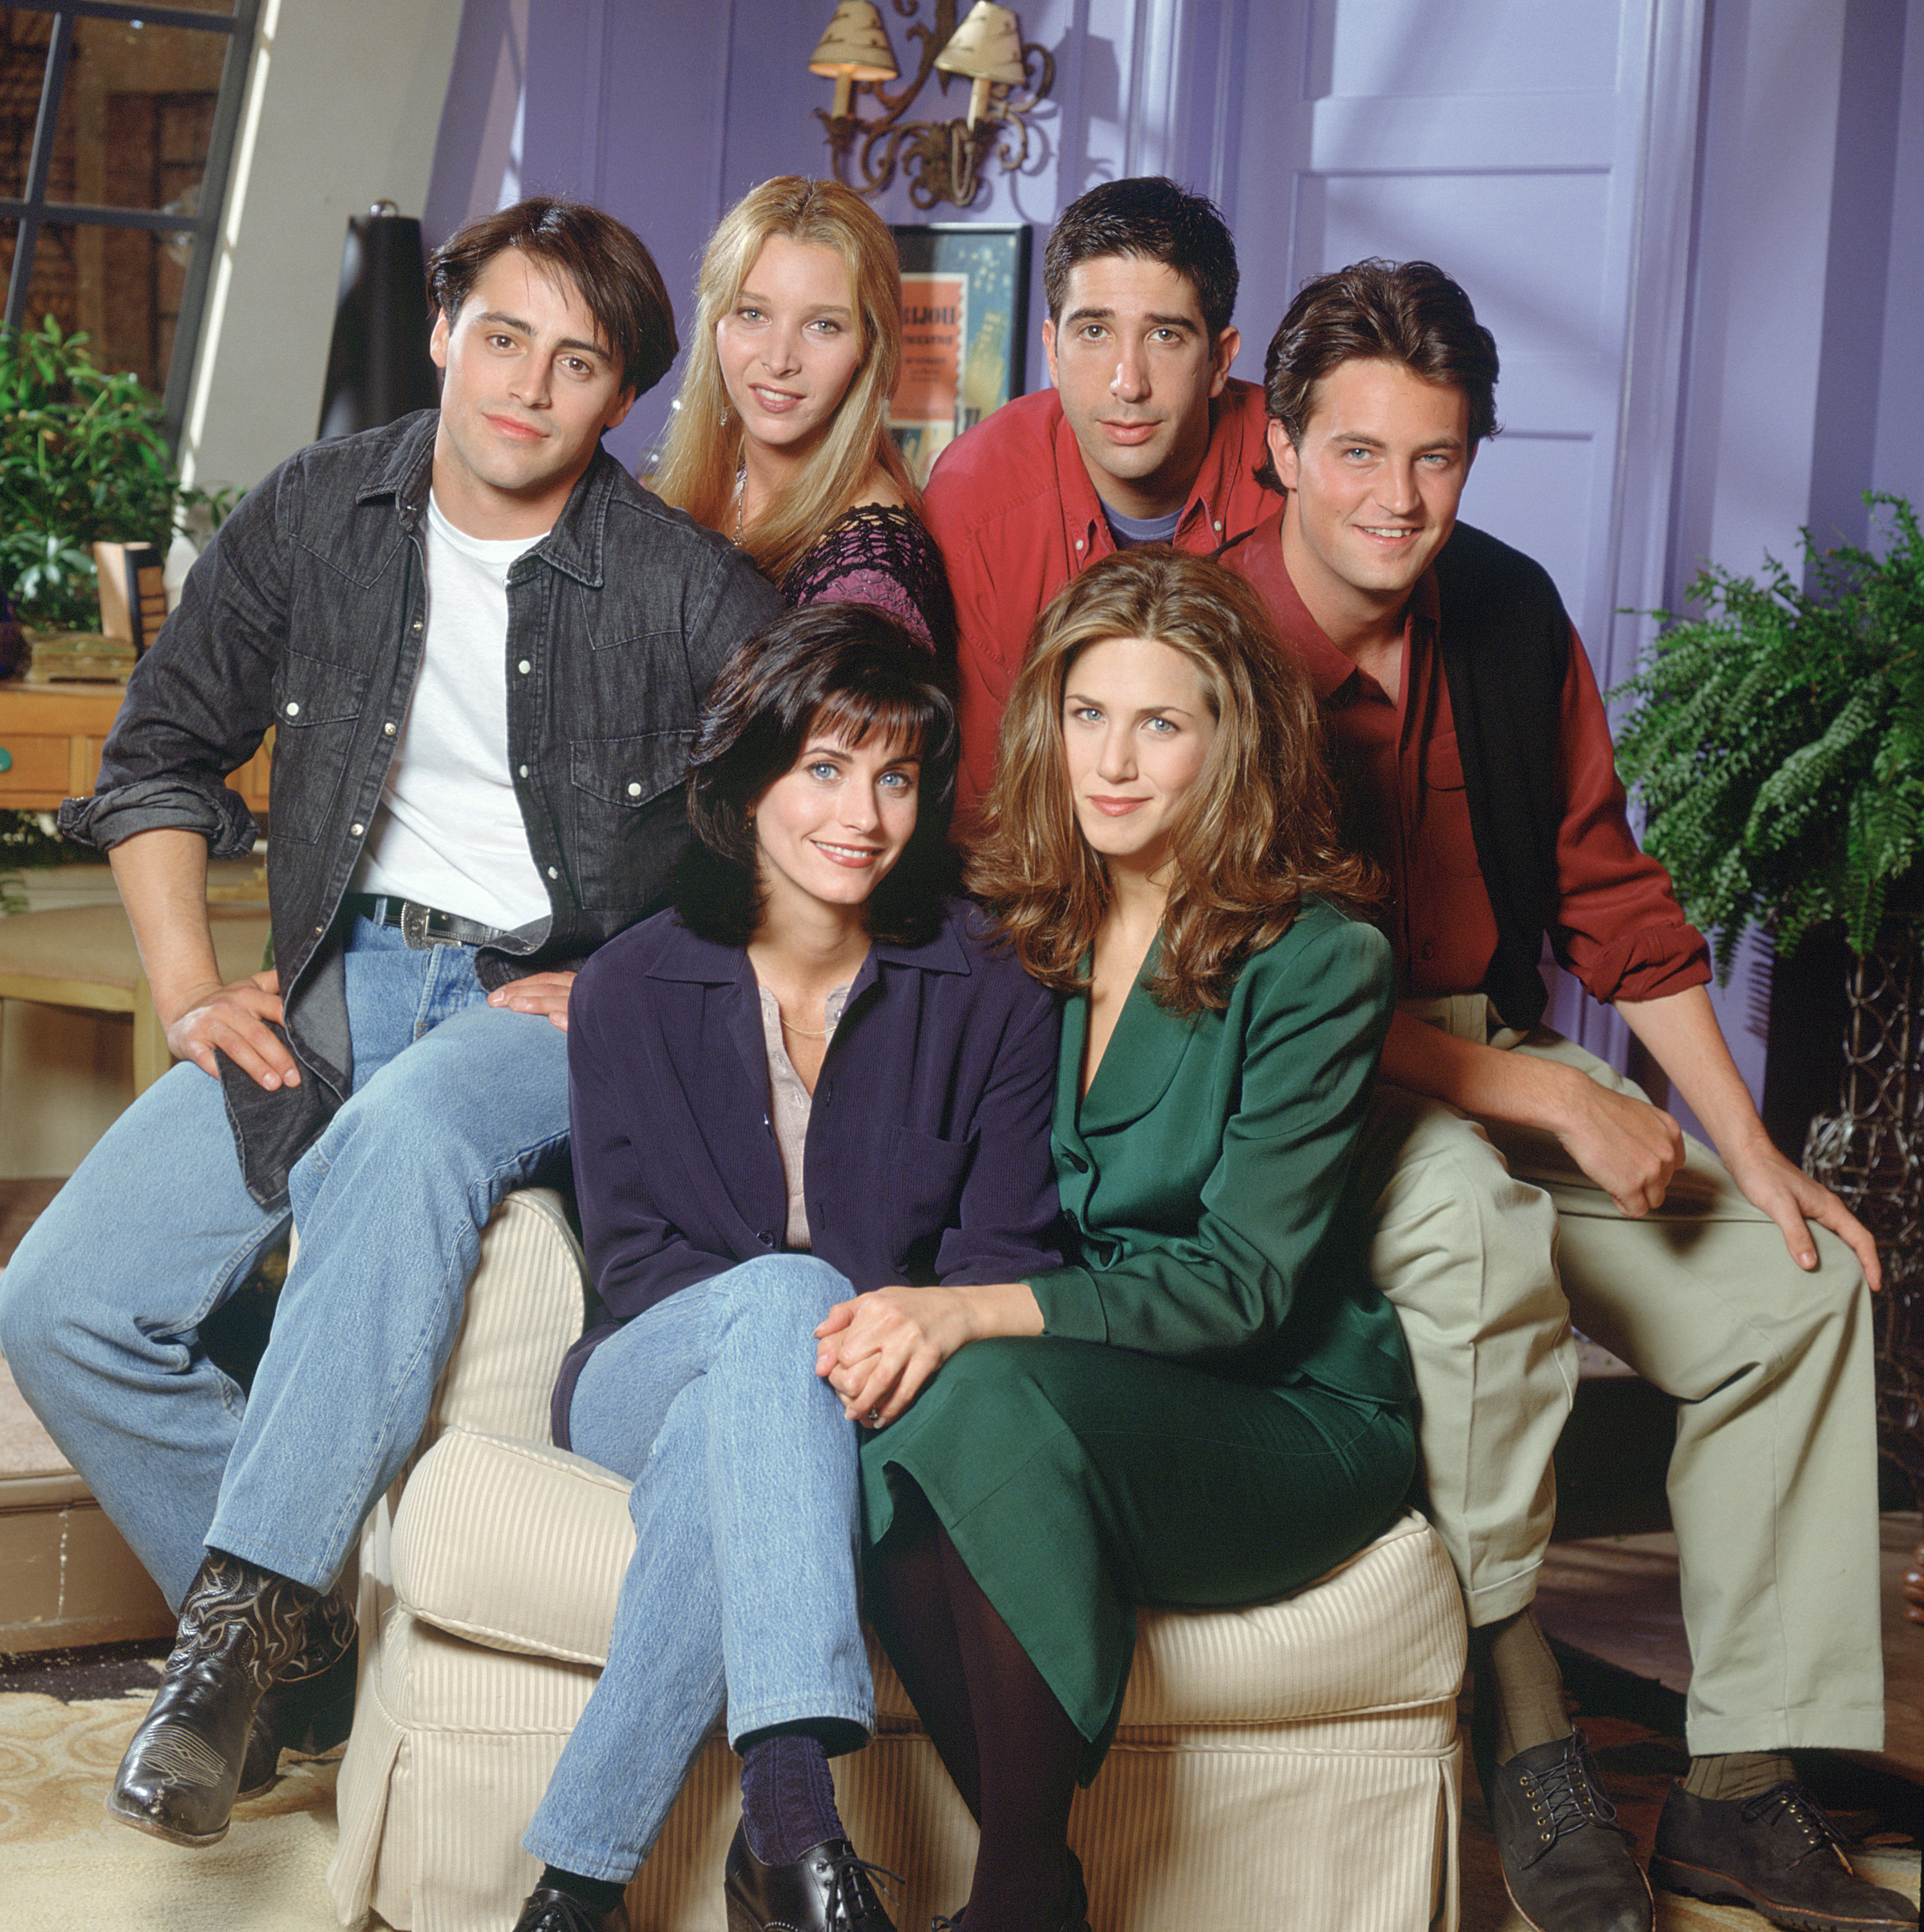 Lisa Kudrow with the rest of the "Friends" cast on set | Source: Getty Images